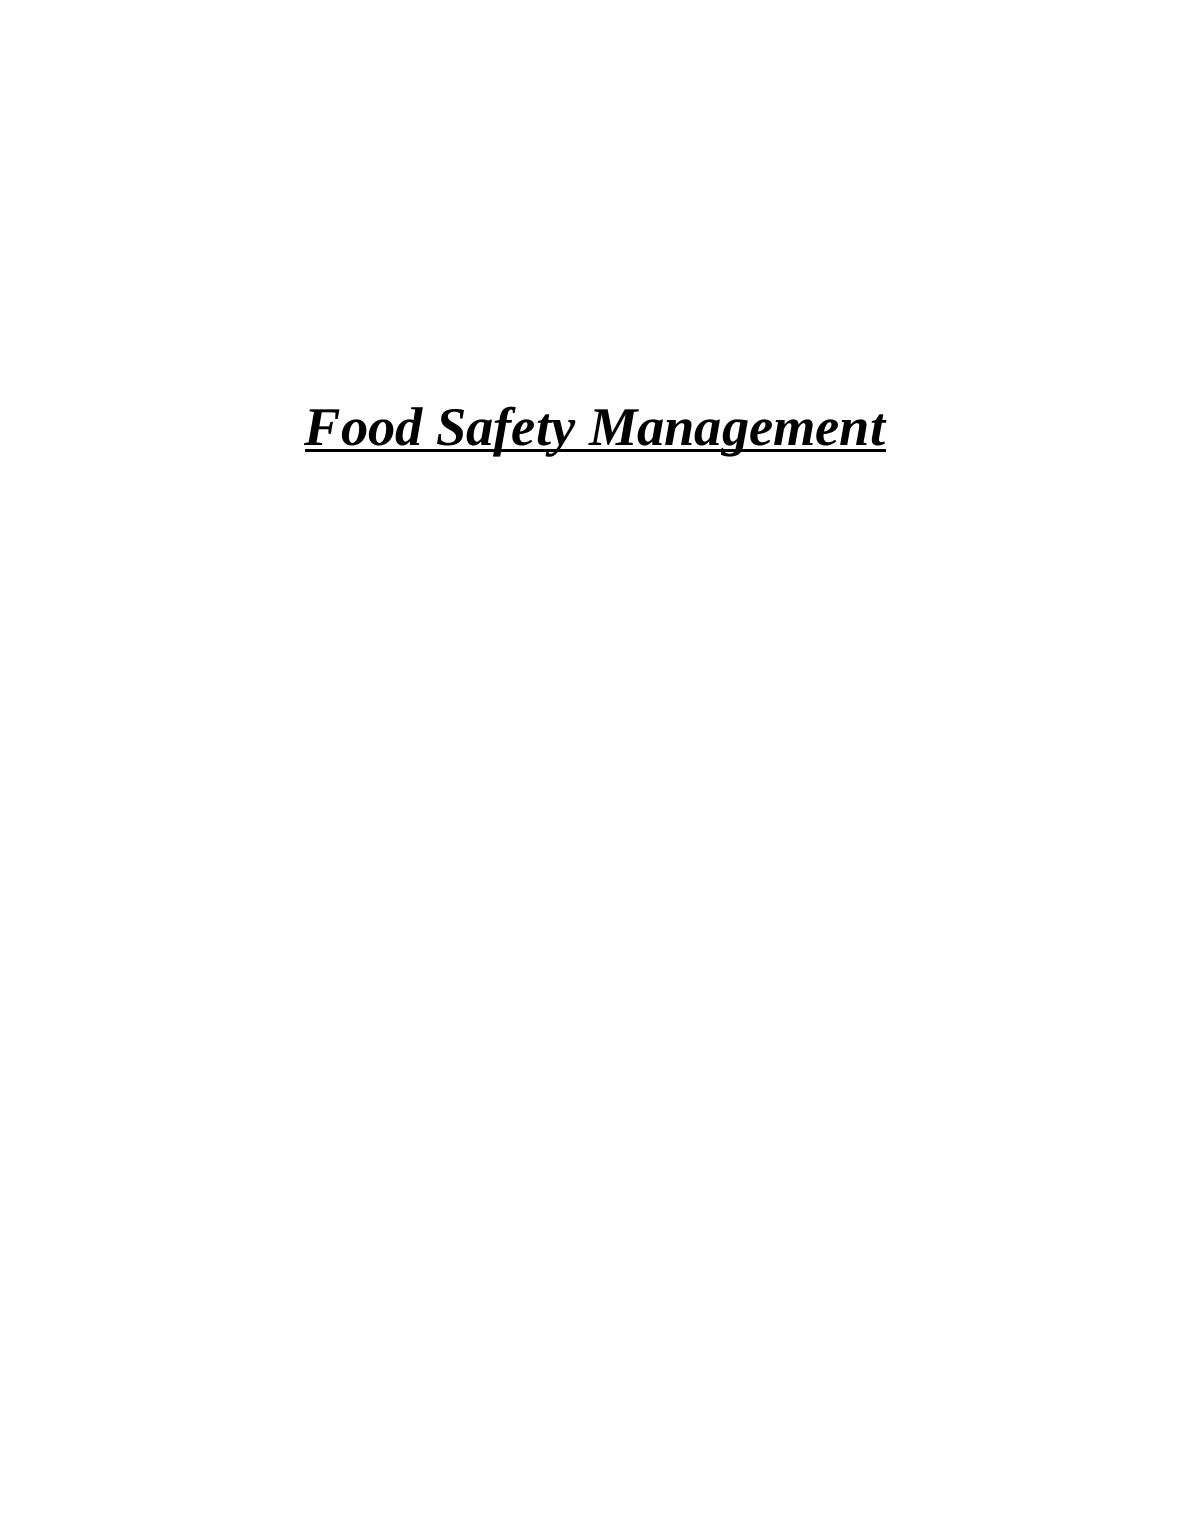 Food Safety Management : Assignment Saample_1